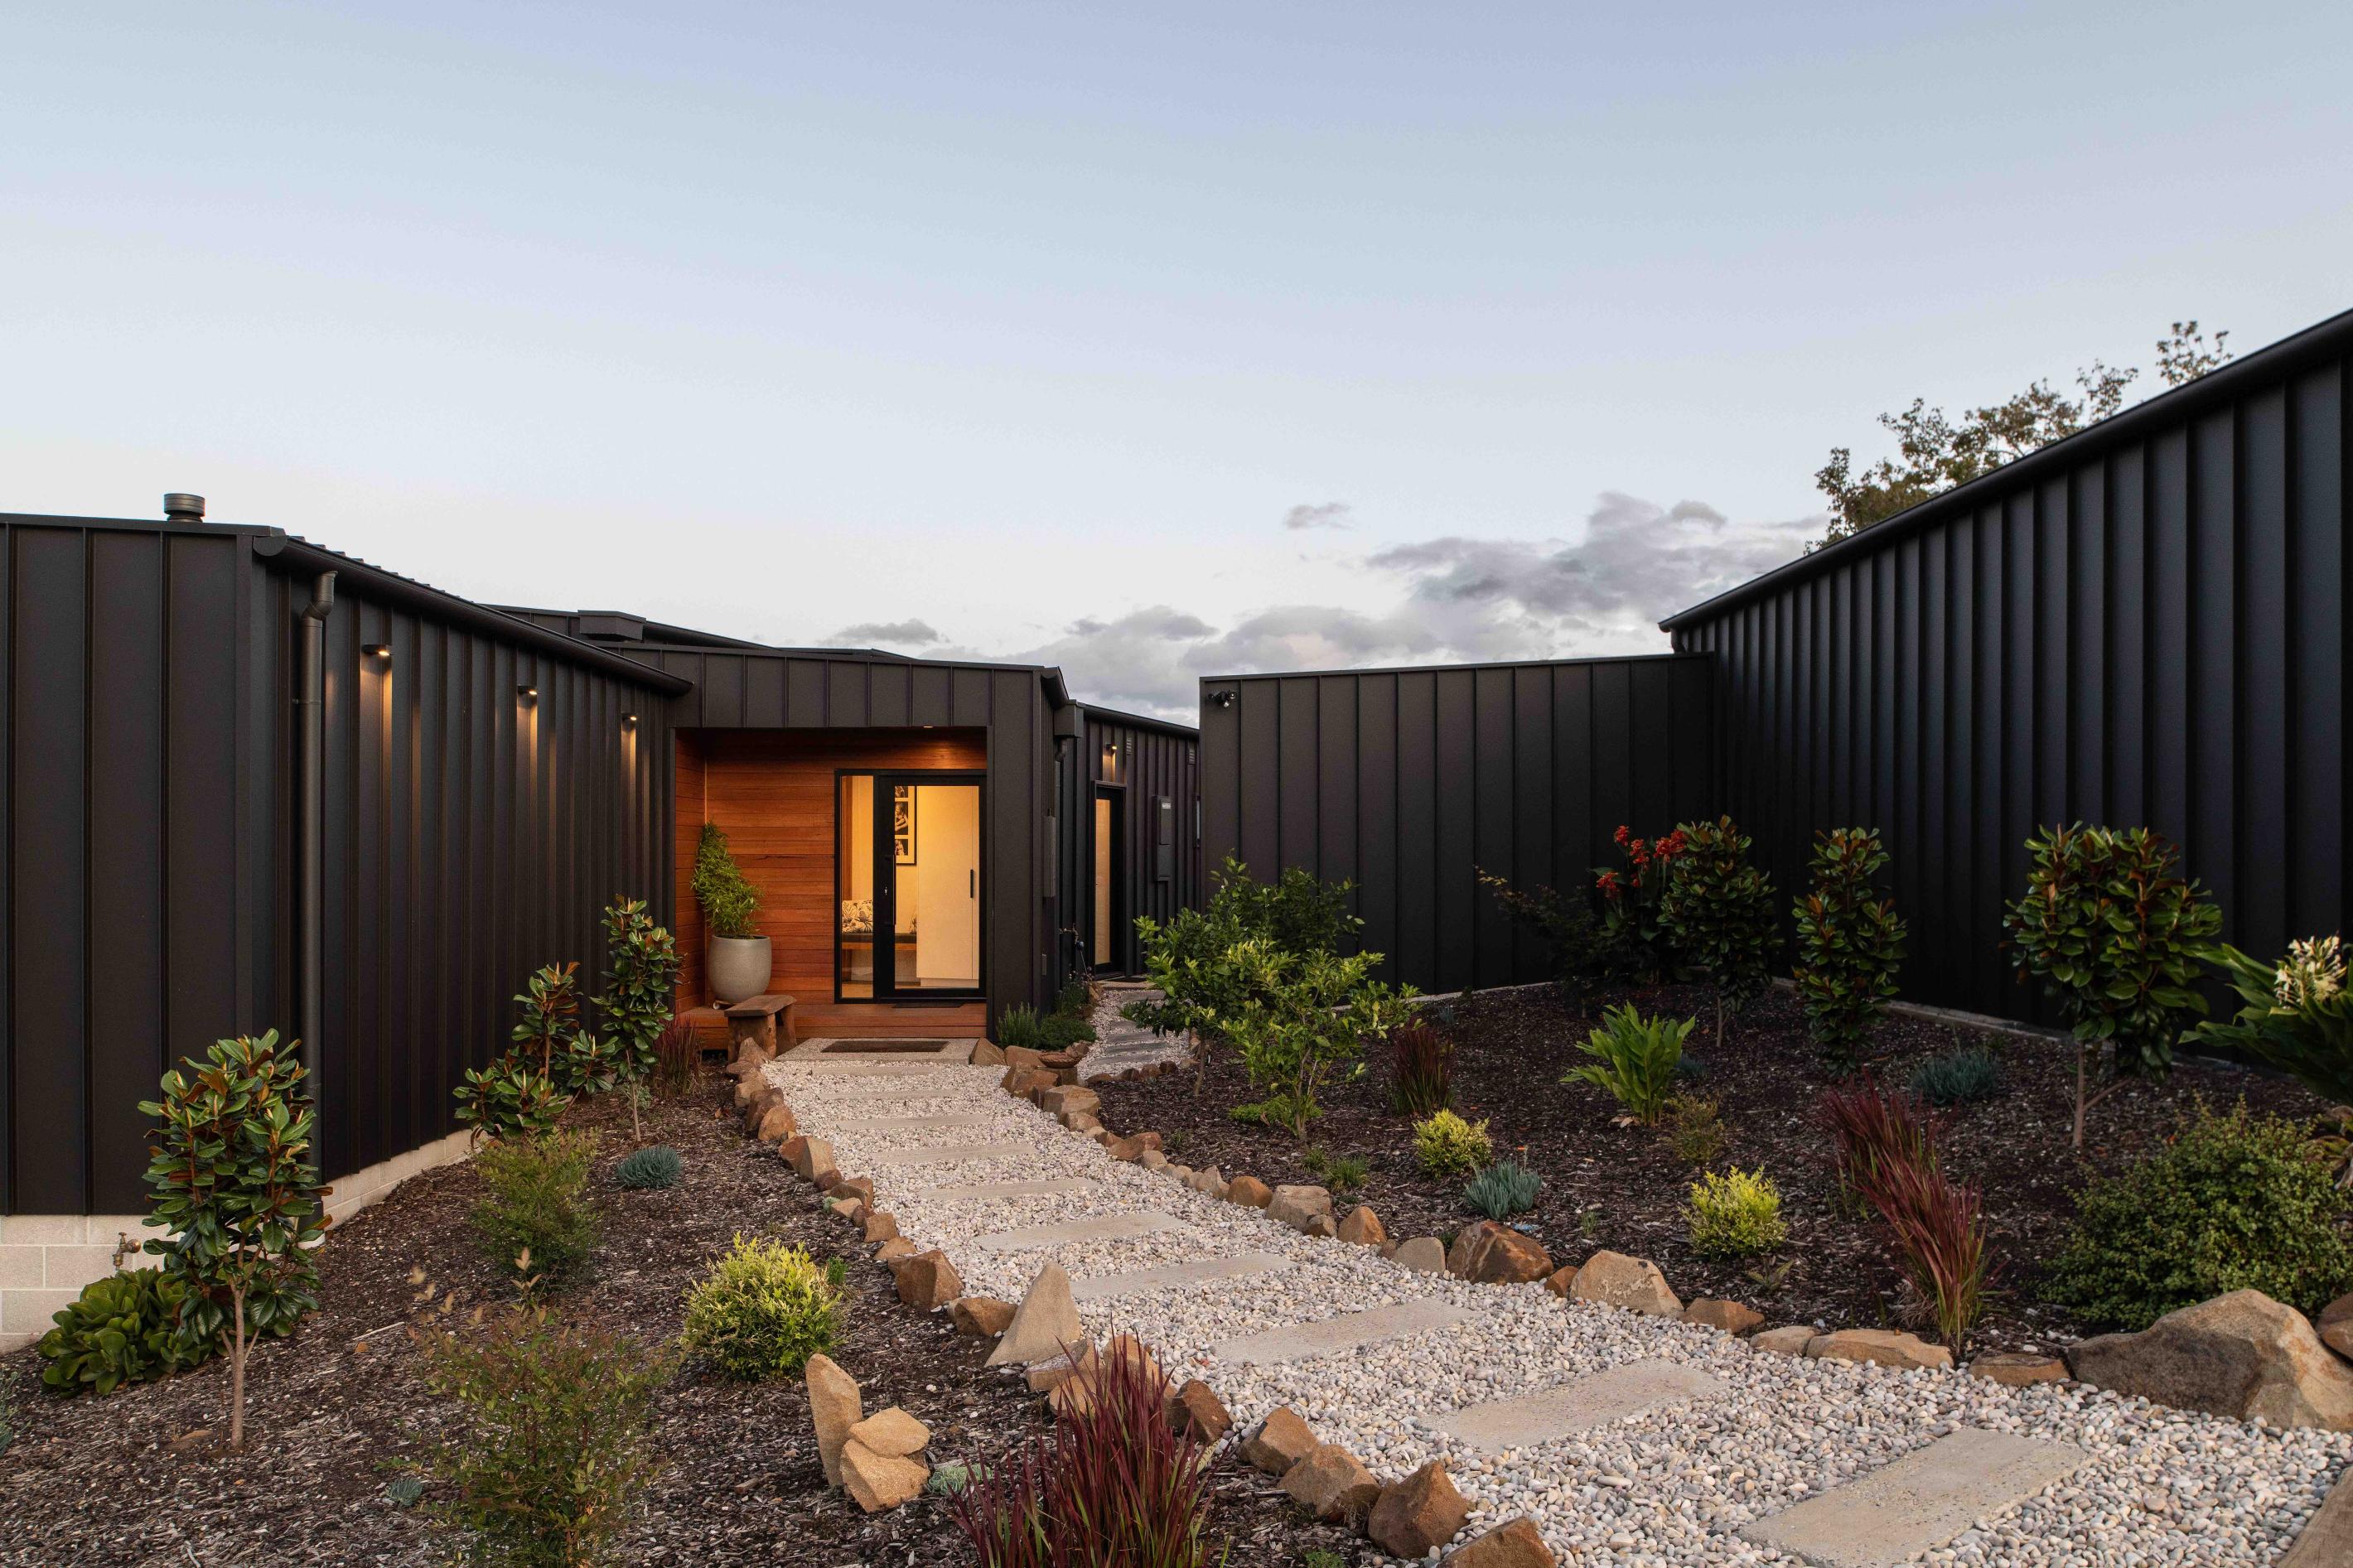 Jetty House' by Edwards + Simpson Architects. Cladding made from COLORBOND® steel in the colour Monument® Matt 